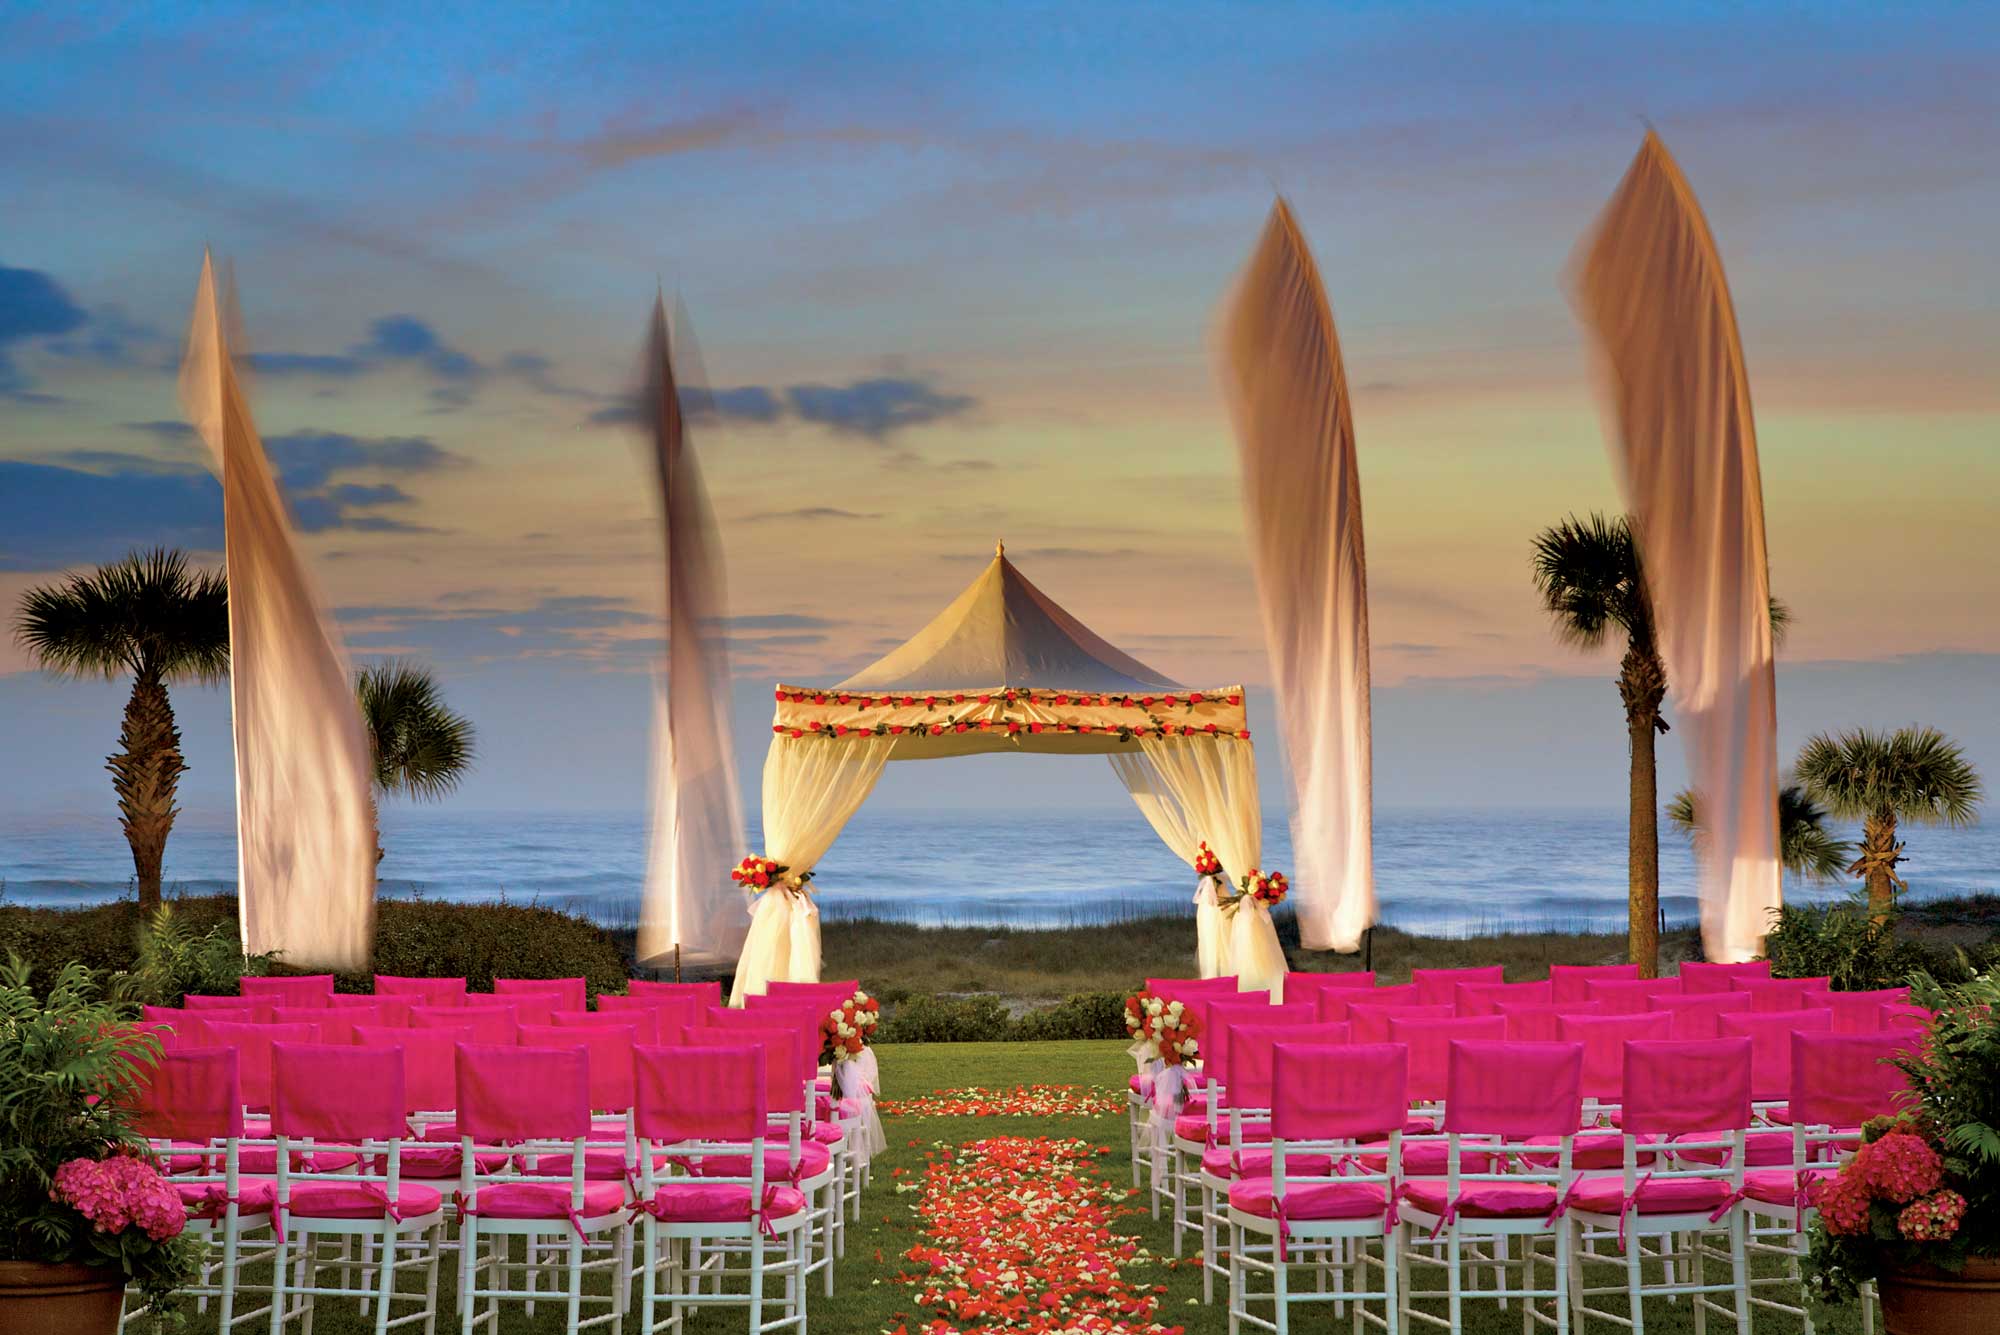 Top Florida Wedding Venues for Florida Destination Weddings | Best Places to Get Married in Florida | The Ritz-Carlton, Amelia Island